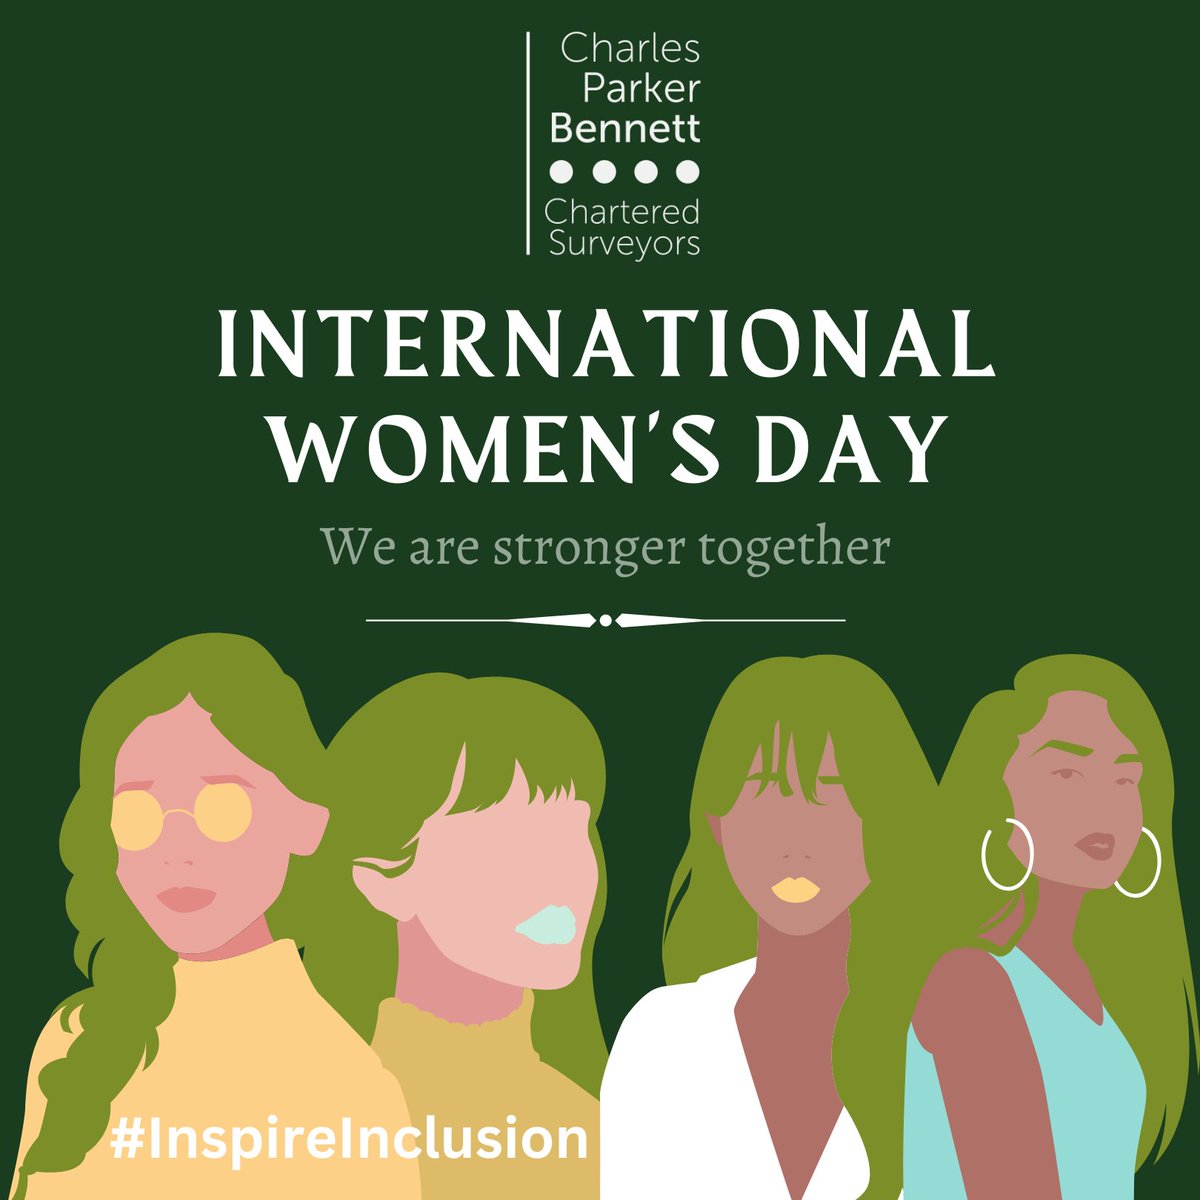 We are proud to support International Women's Day and the  #InspireInclusion campaign inspiring others to understand and value women’s inclusion to forge a better world.

A shout out to our female employees, clients and customers!

#IWD2024 #WomenInBusiness #CharlesParkerBennett